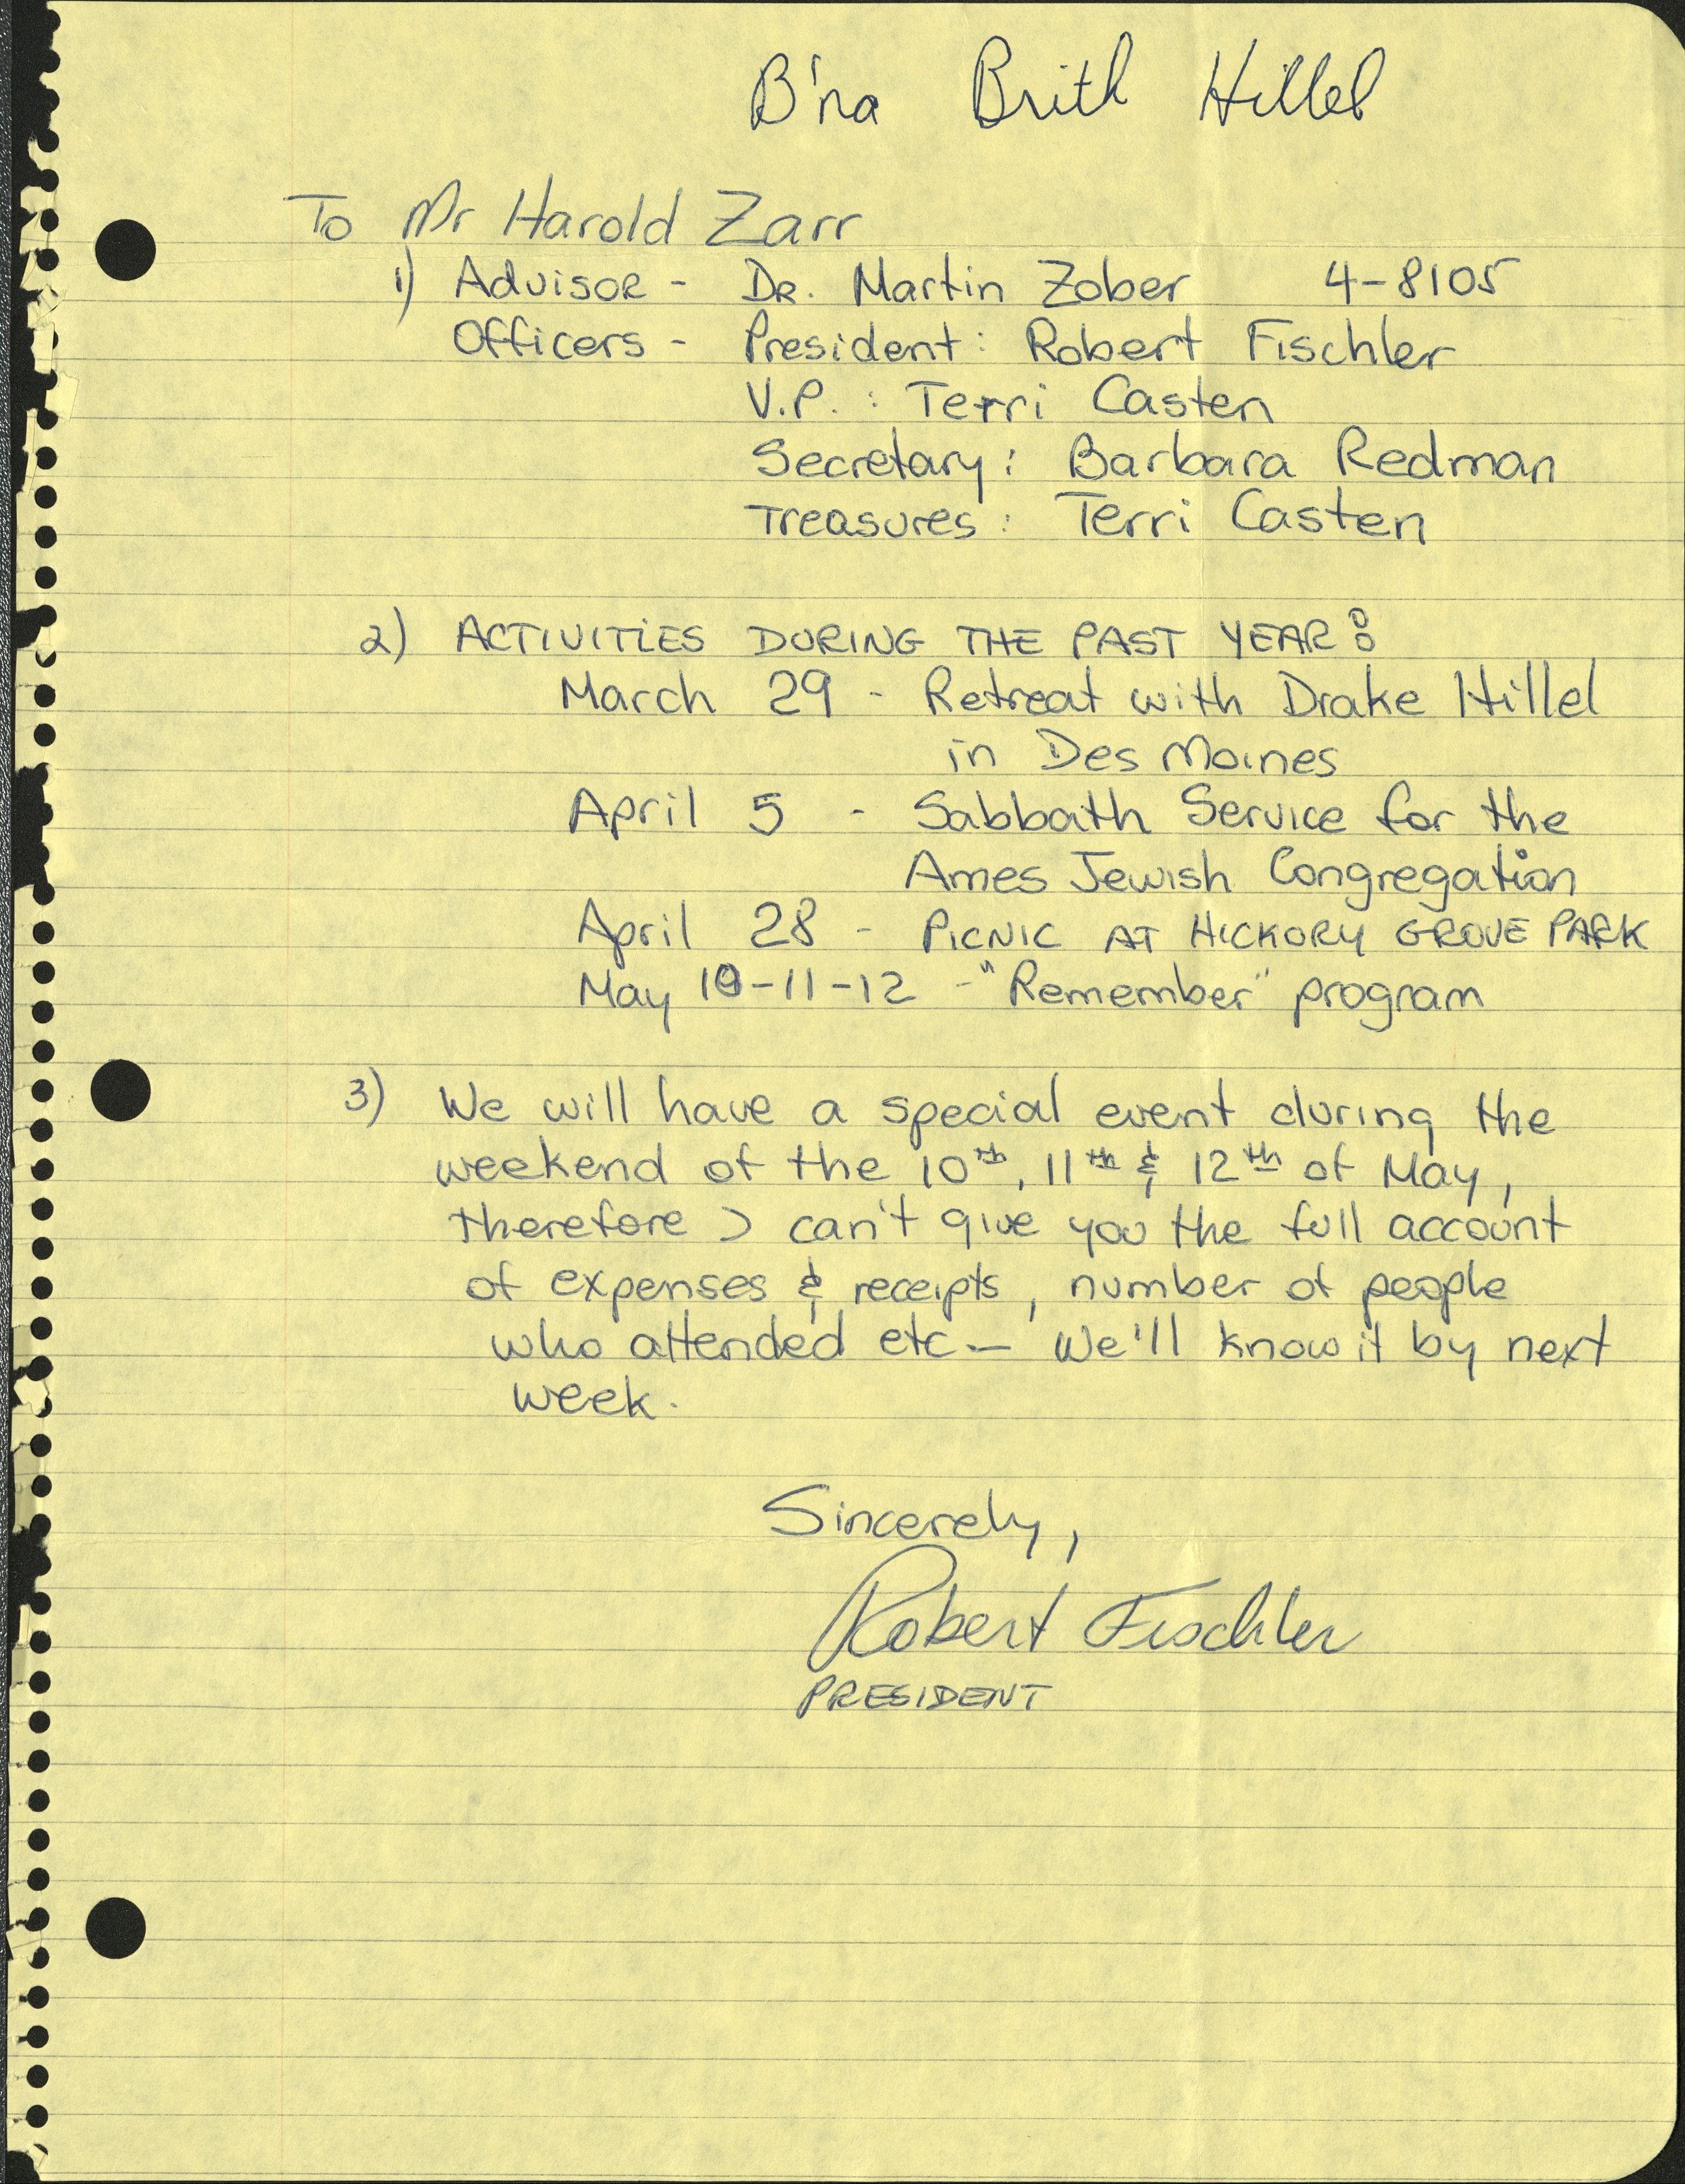 Handwritten calendar and financial statement for club activities for the 1972-1973 school year. For details on text, please contact the ISU archives.